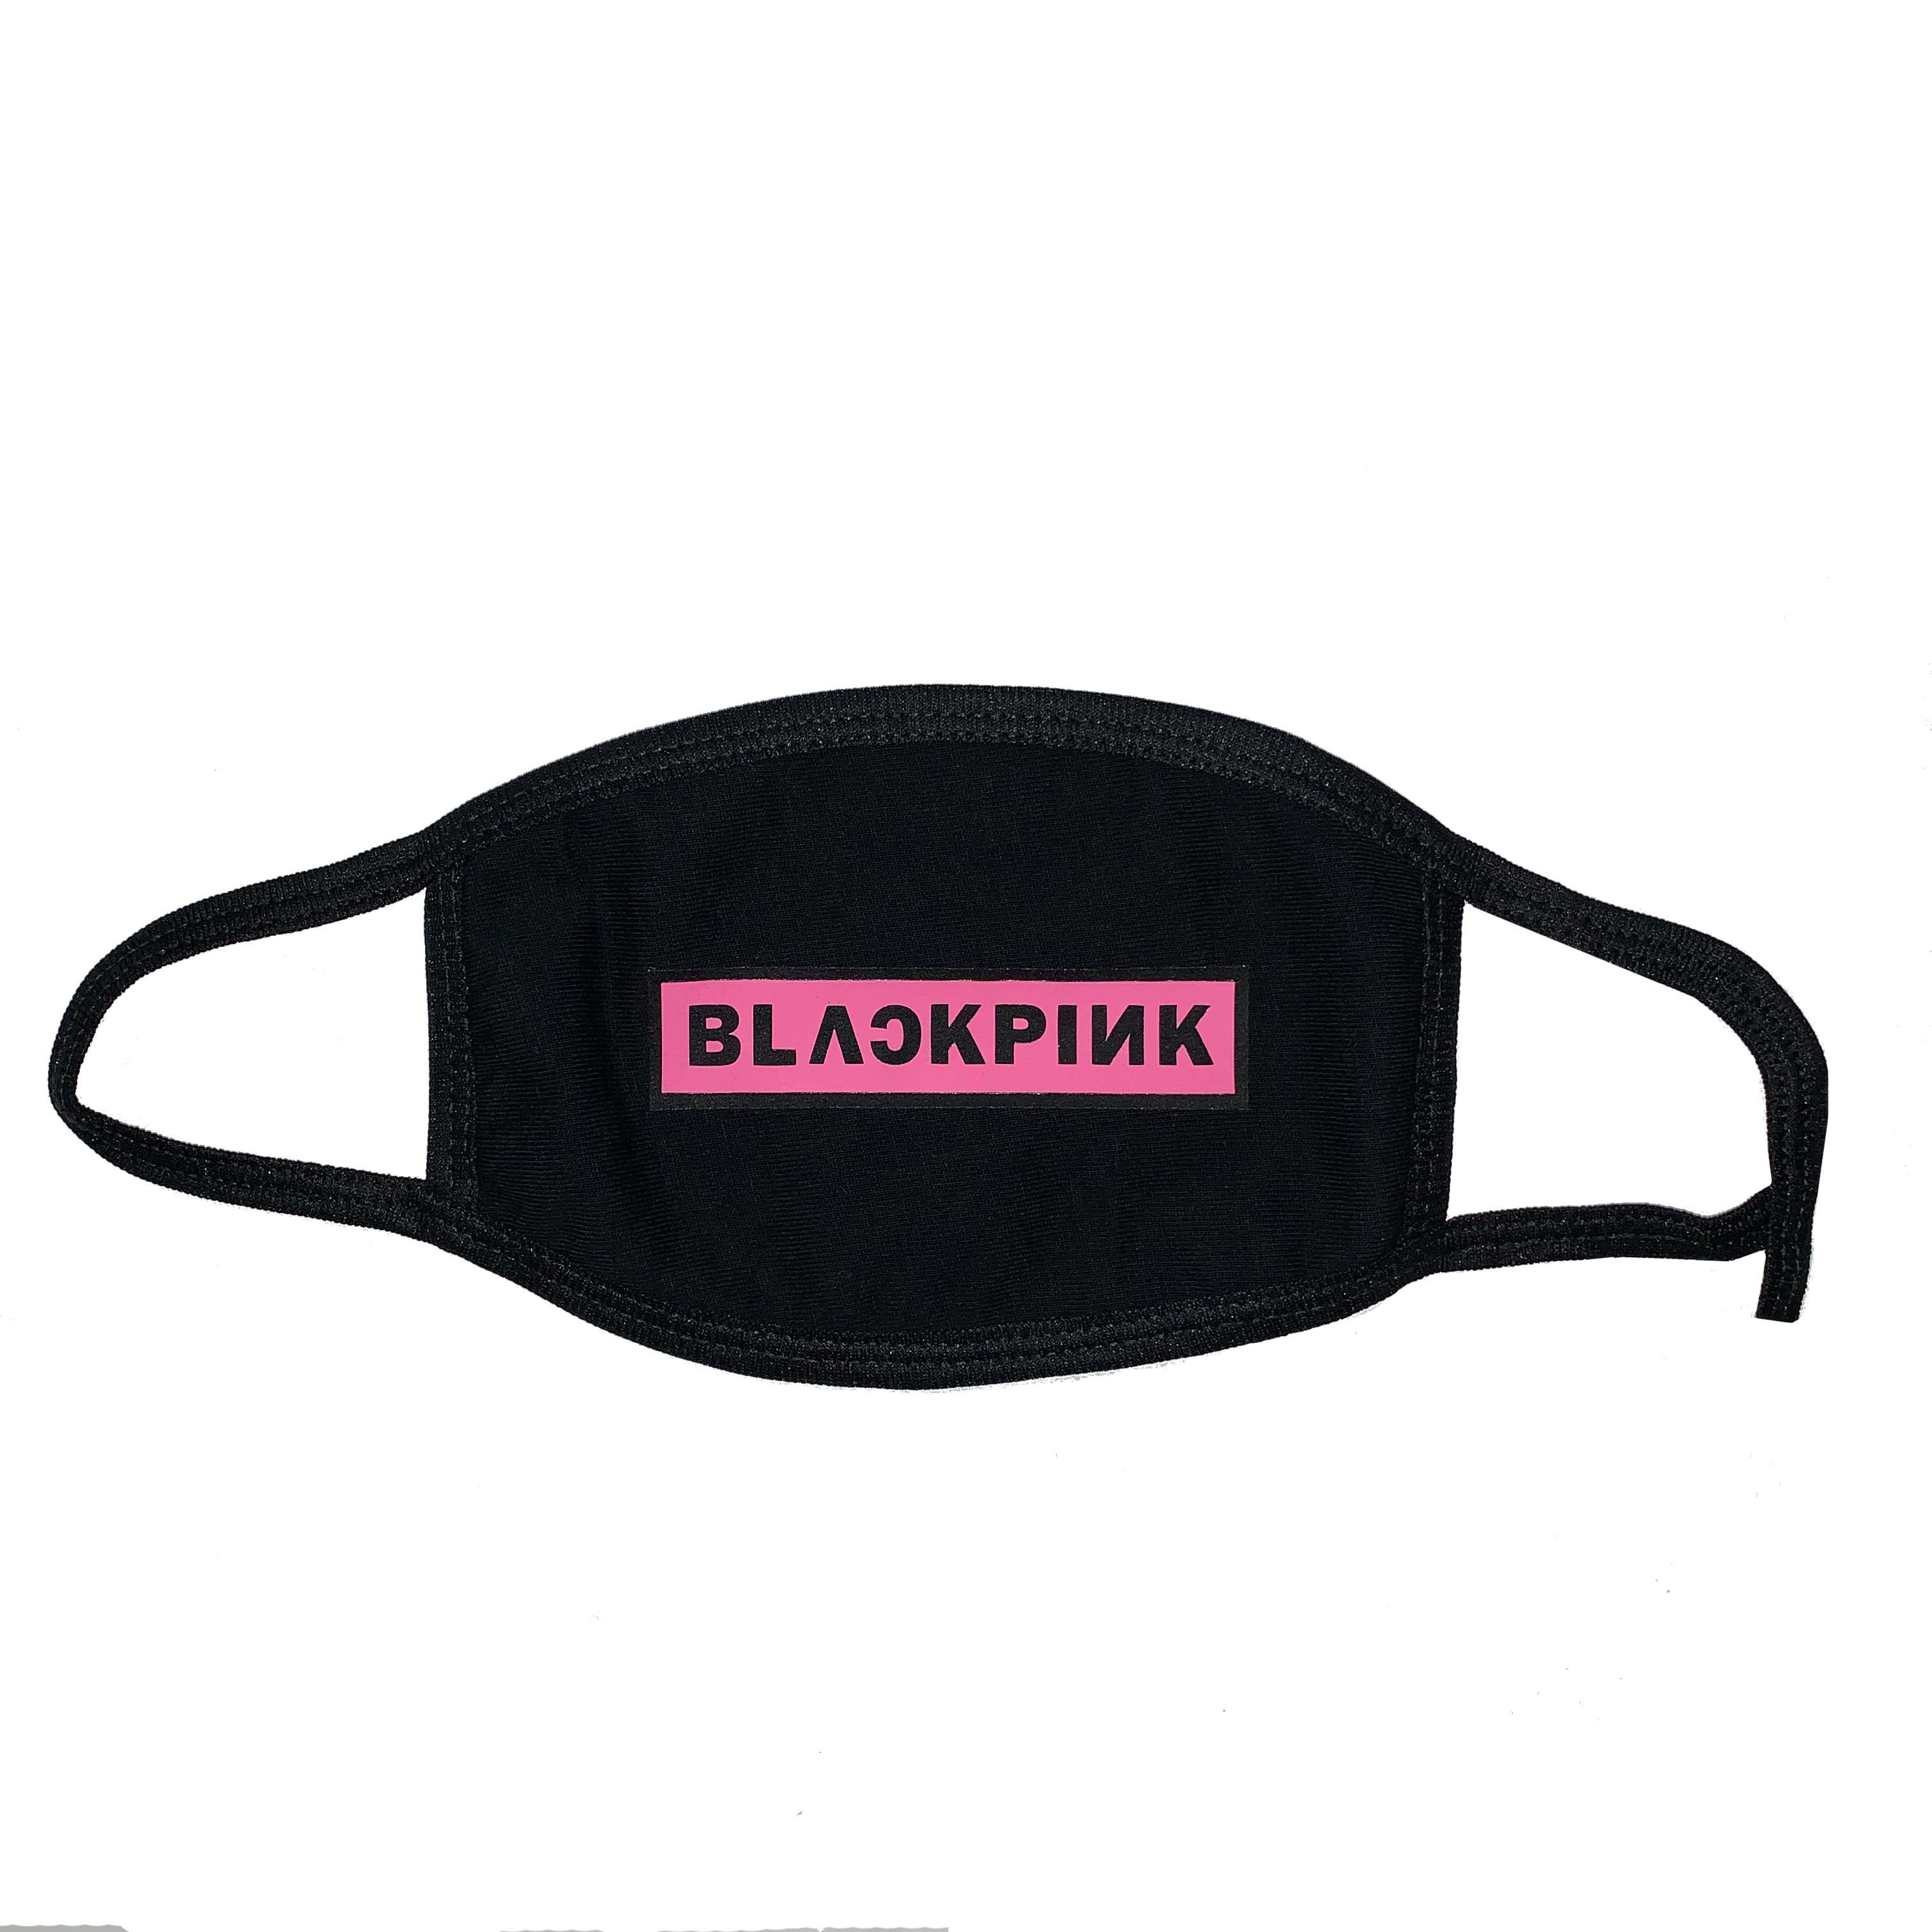 Anime Cosplay Mouth Mask Black KPOP Blackpink One Size Fits Most